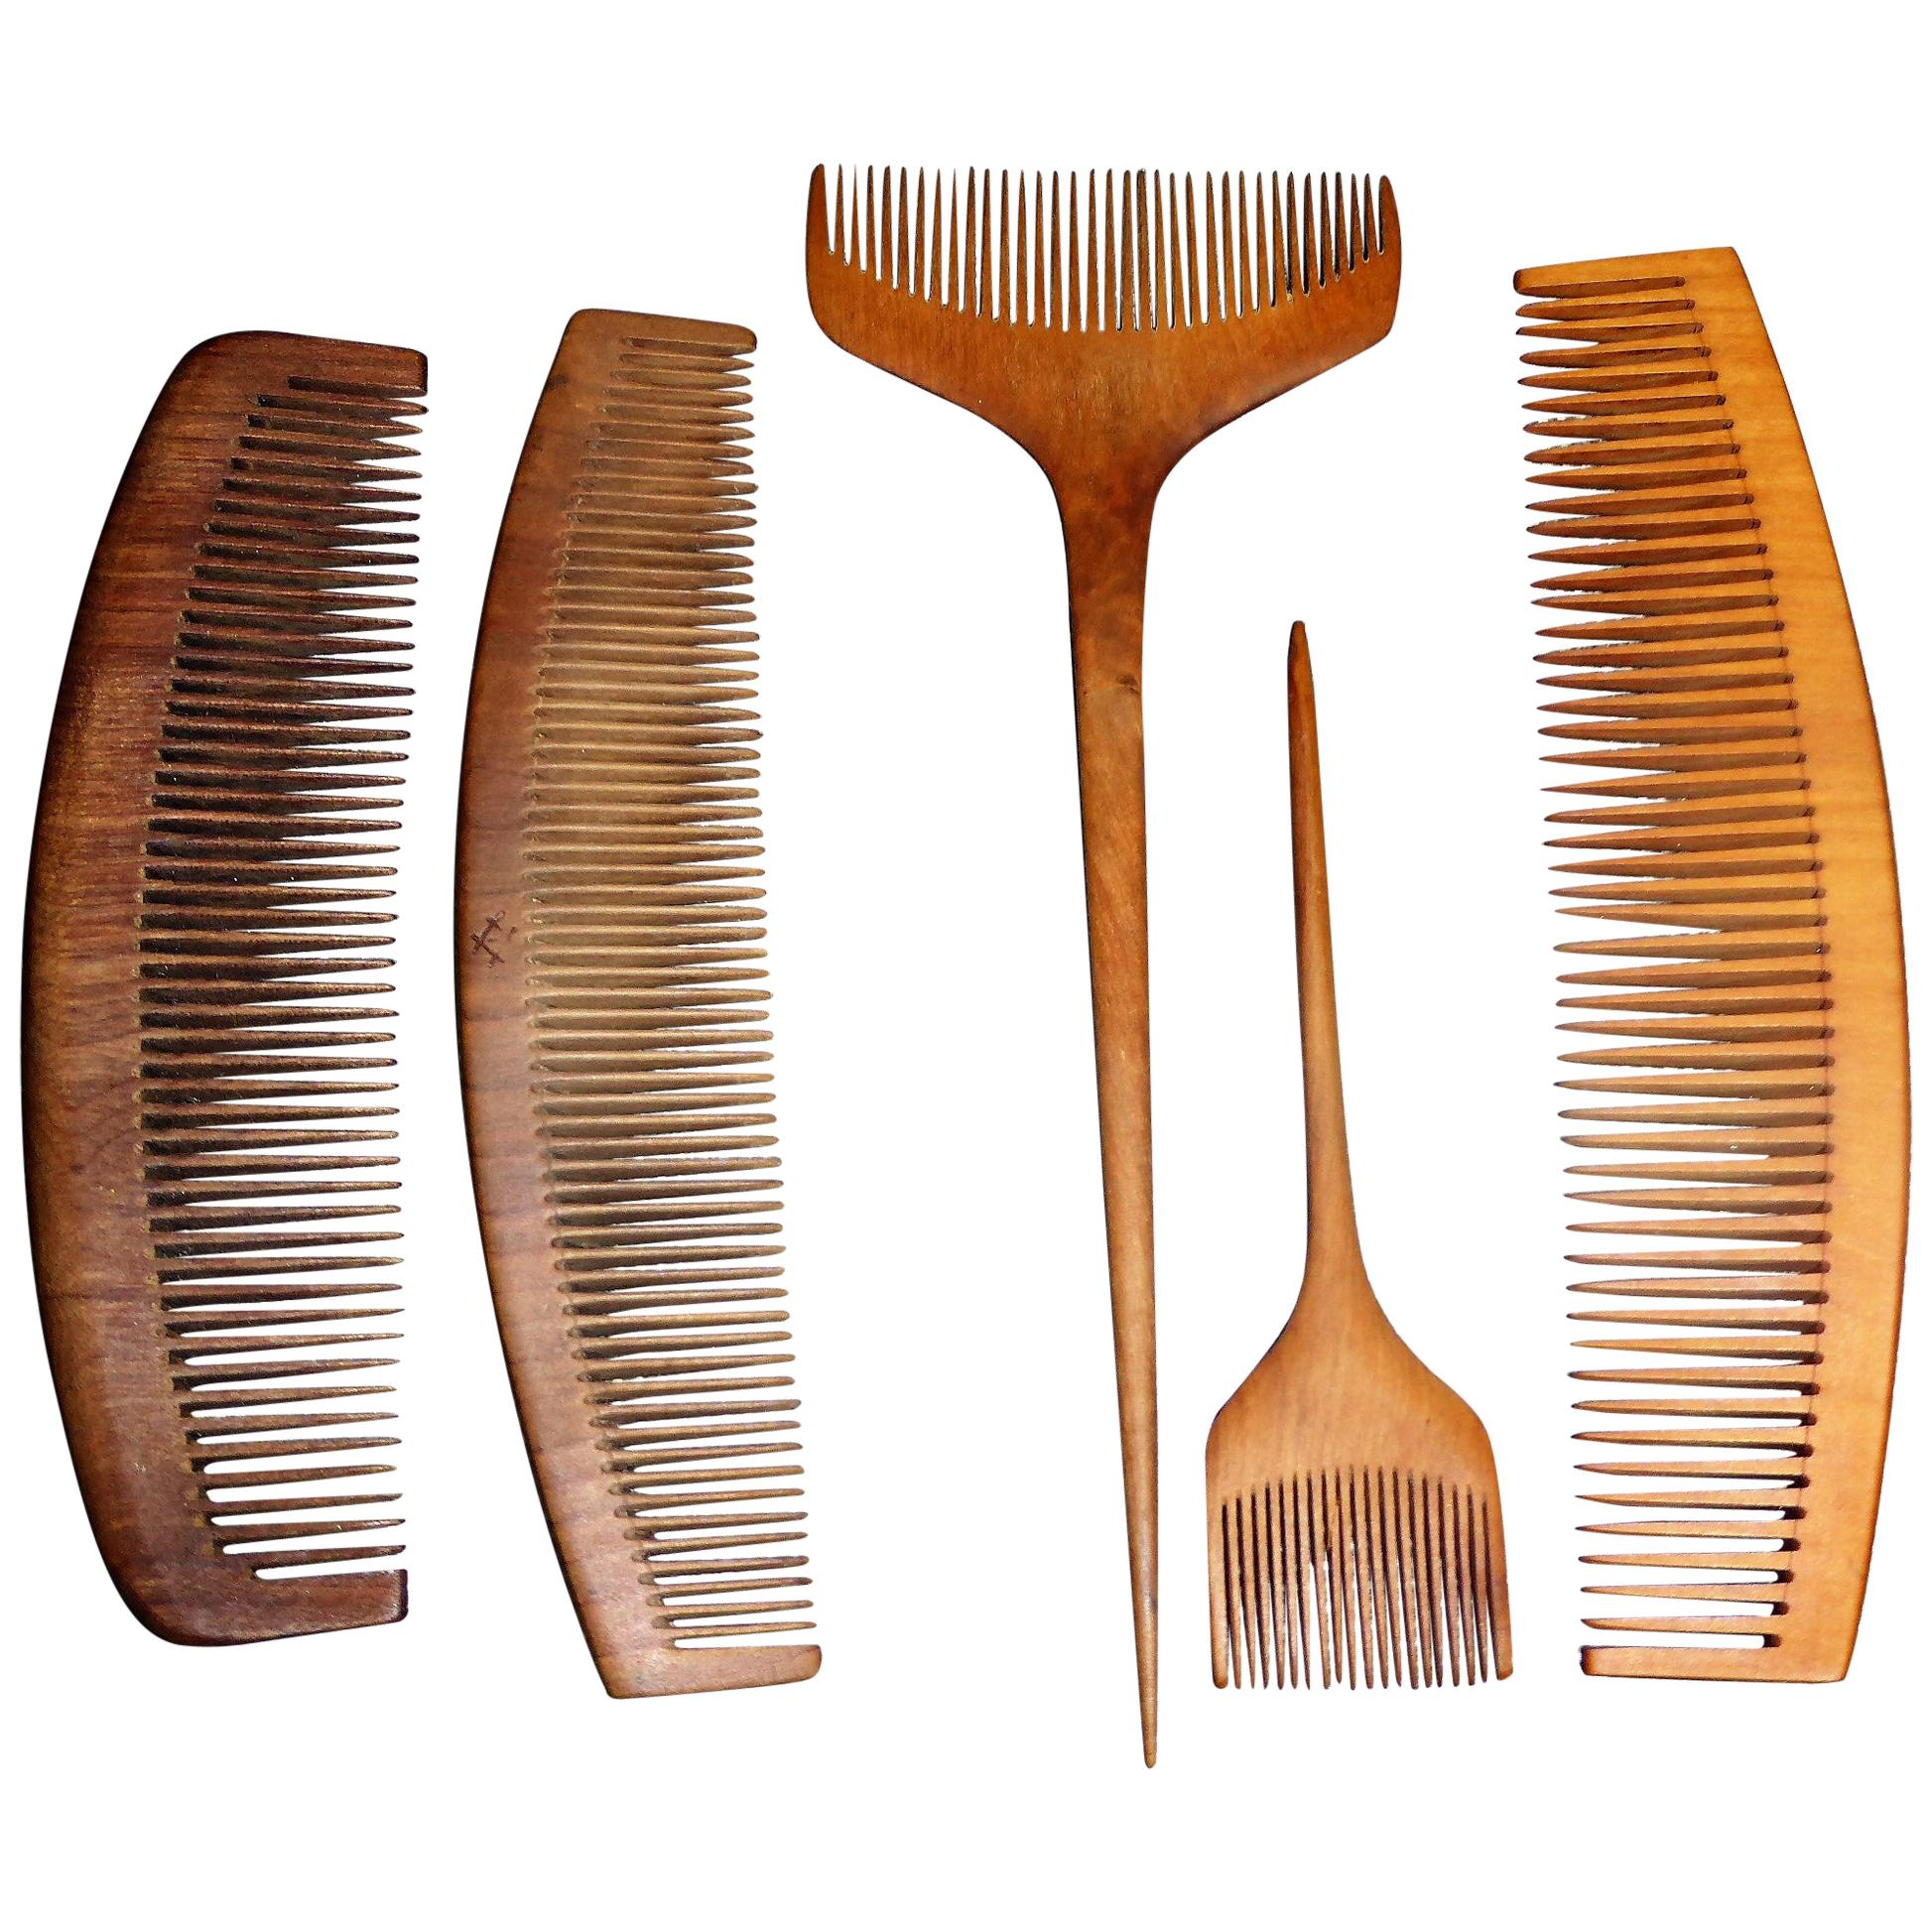 Vintage 1930s Japanese Tsuge Wood Comb Collection